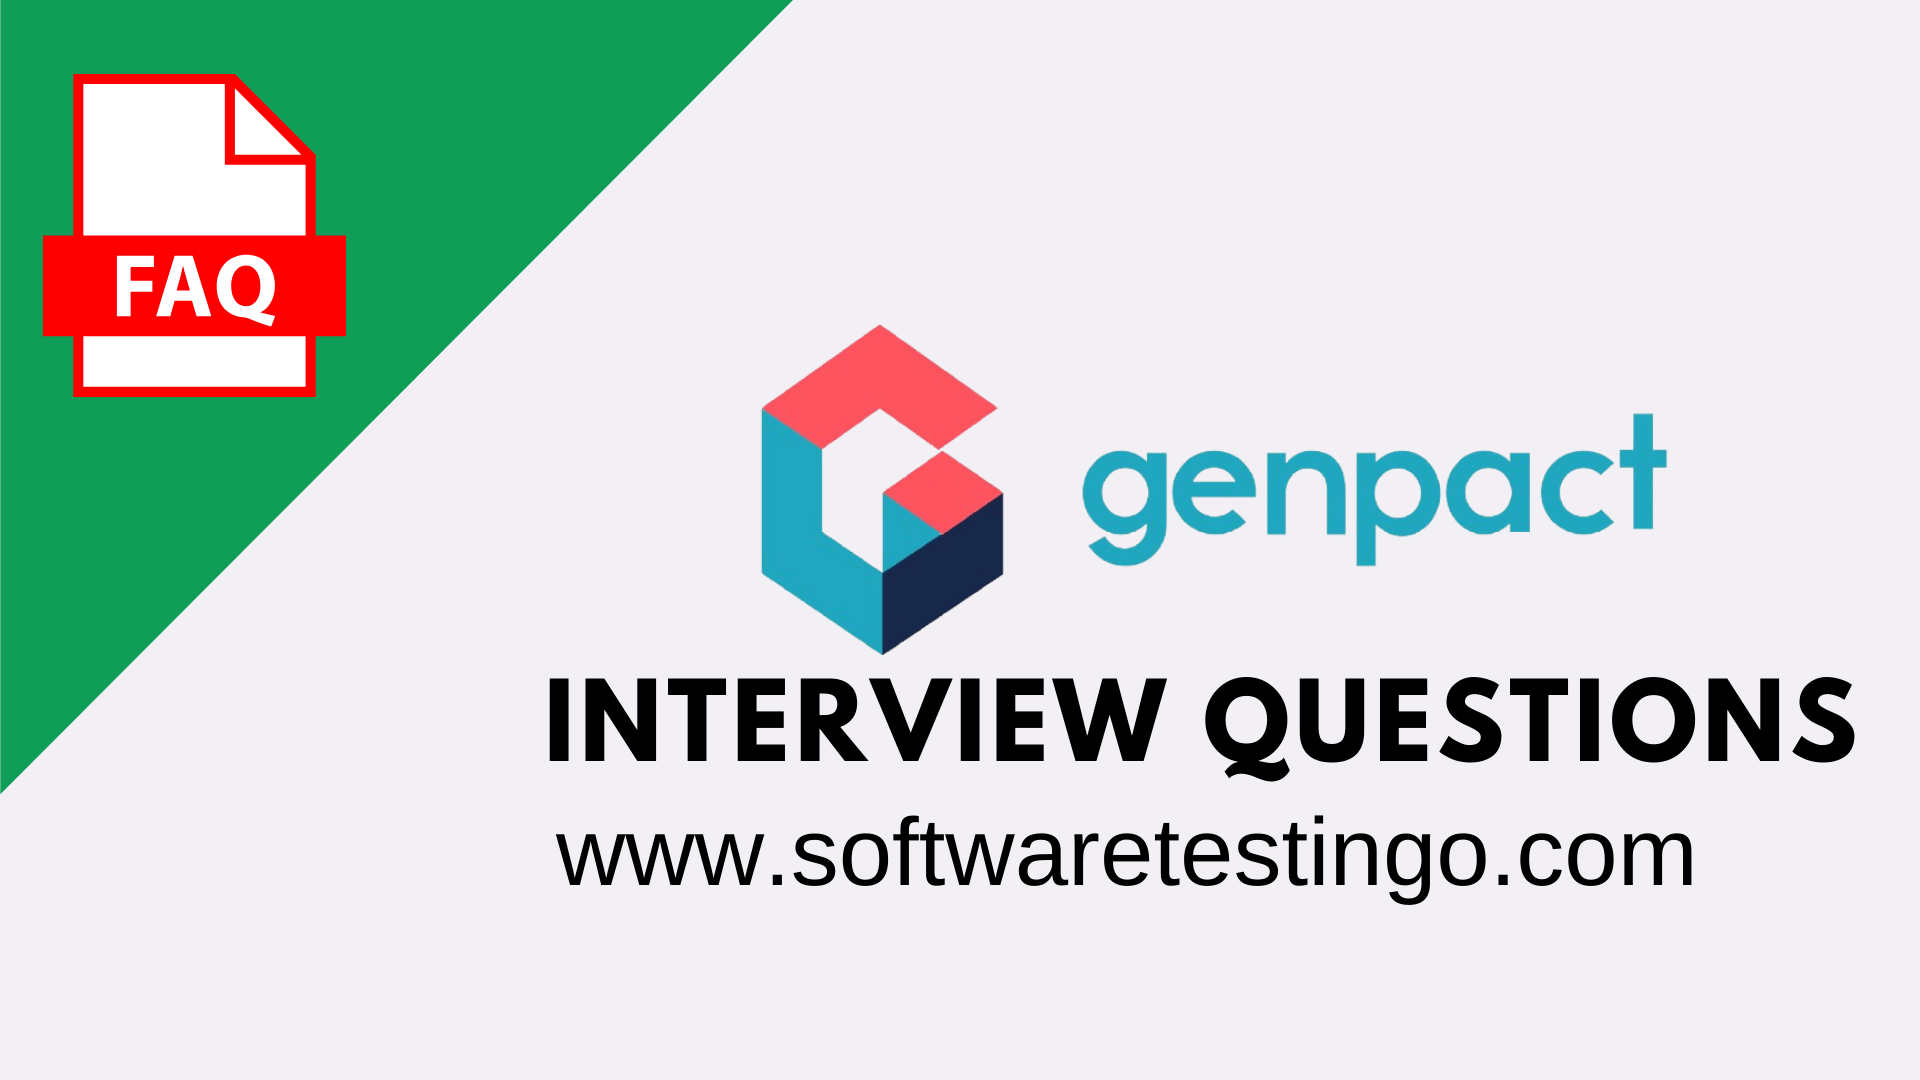 Genpact Interview Questions